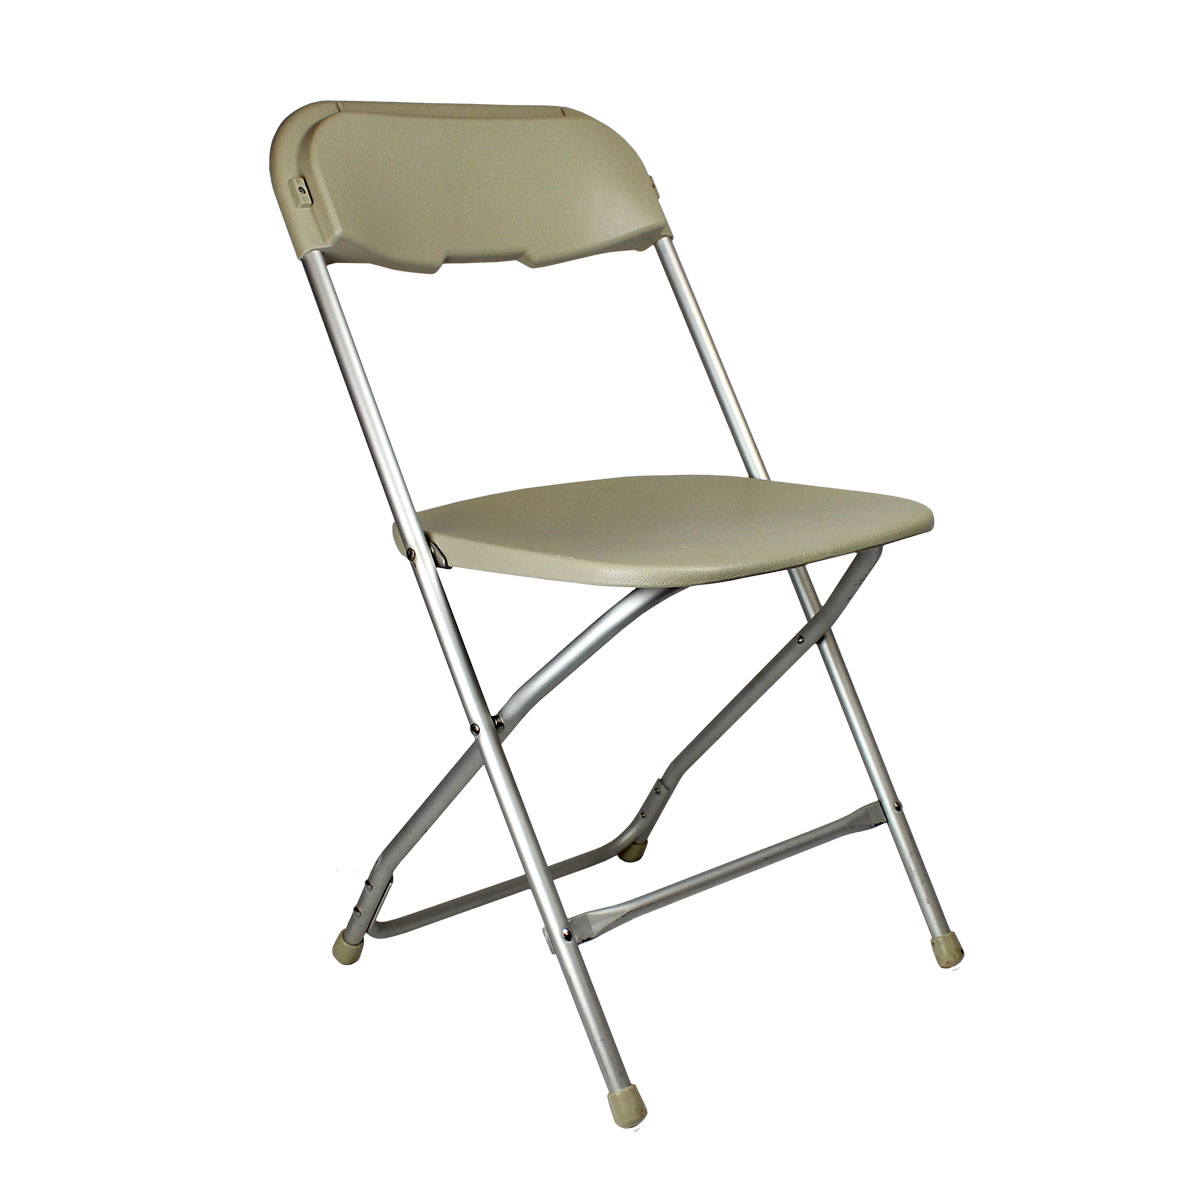 Chair Beige Folding Plastic With Aluminum Frame